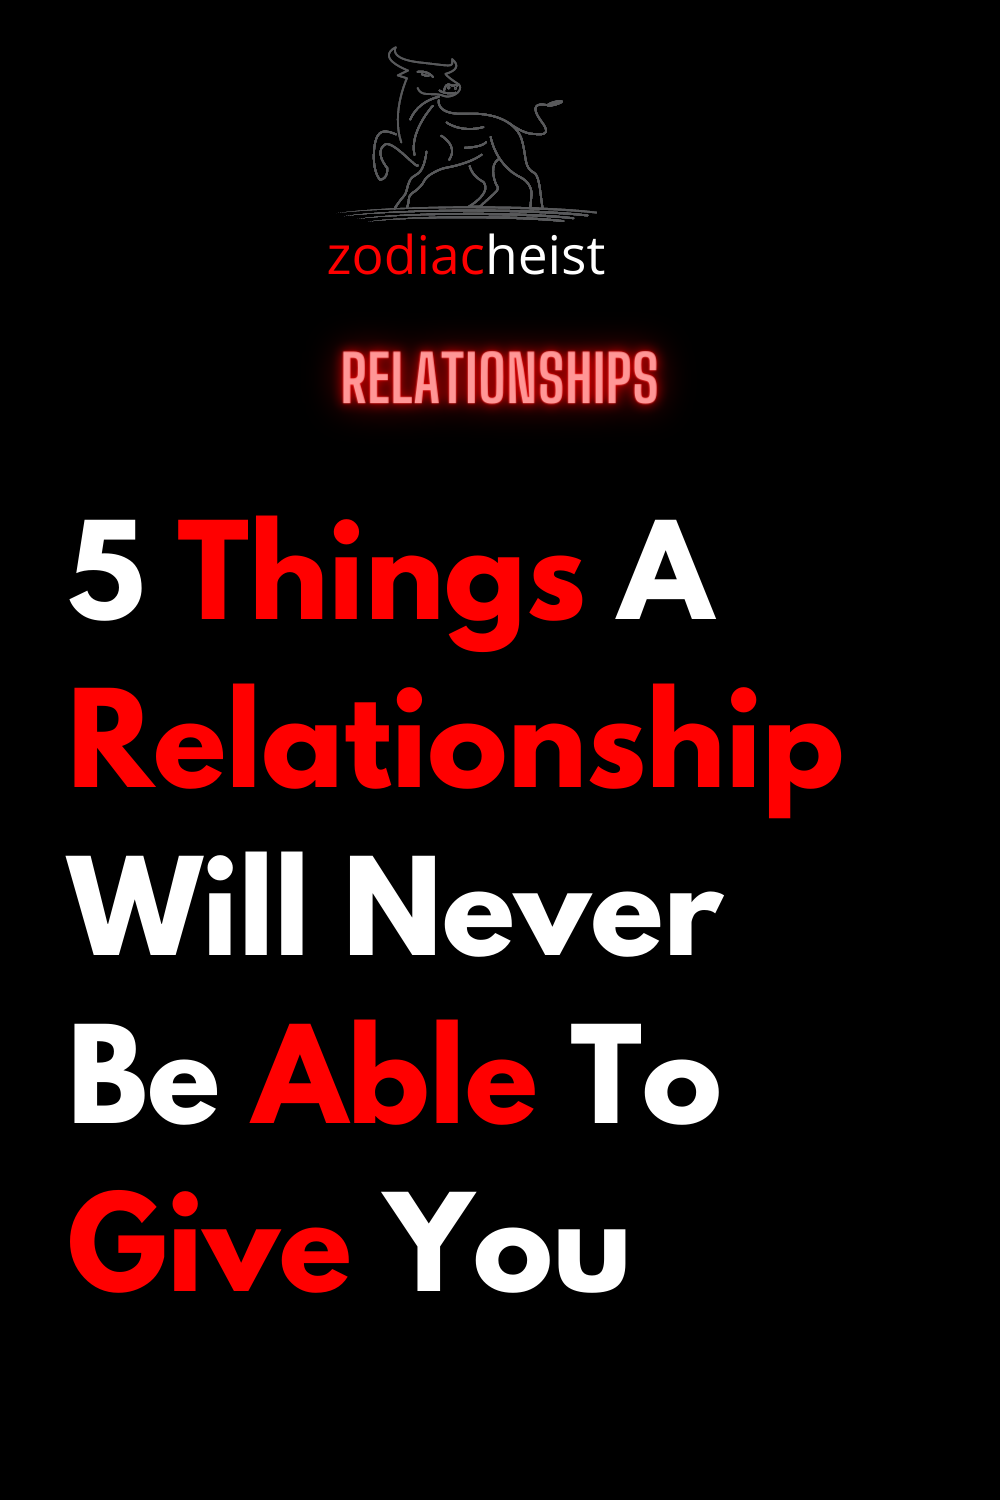 5 Things A Relationship Will Never Be Able To Give You